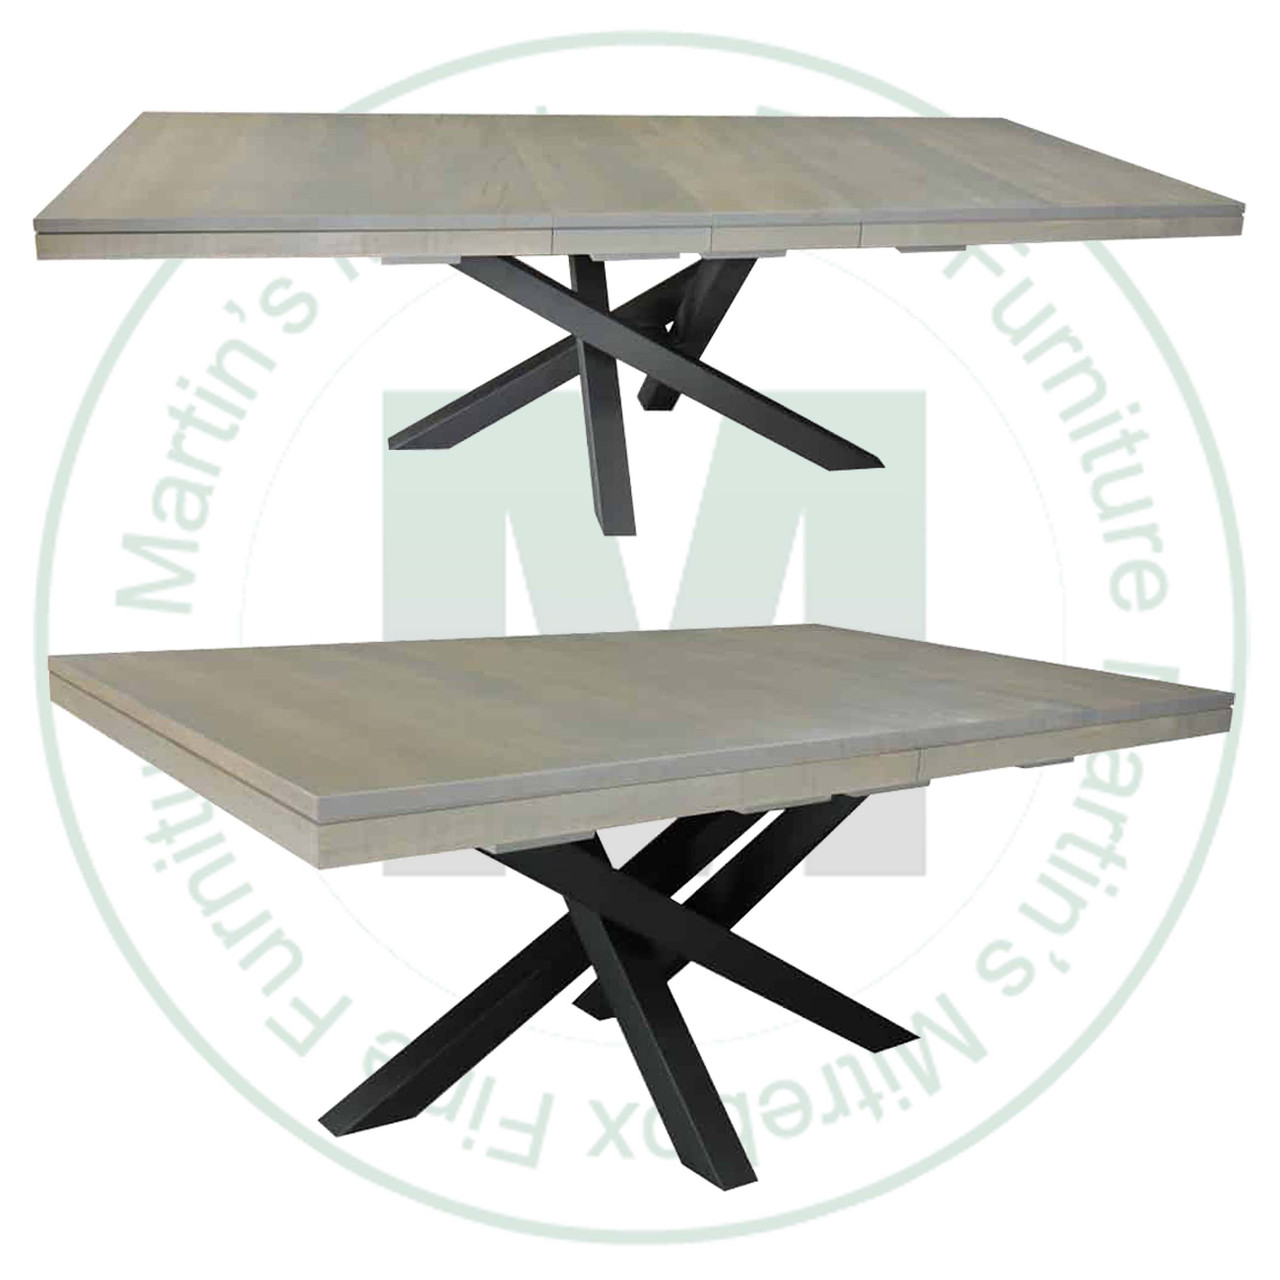 Pine Warehouse Solid Top Pedestal Table 42'' Deep x 84'' Wide x 30'' High With 2 - 12'' Leaves.